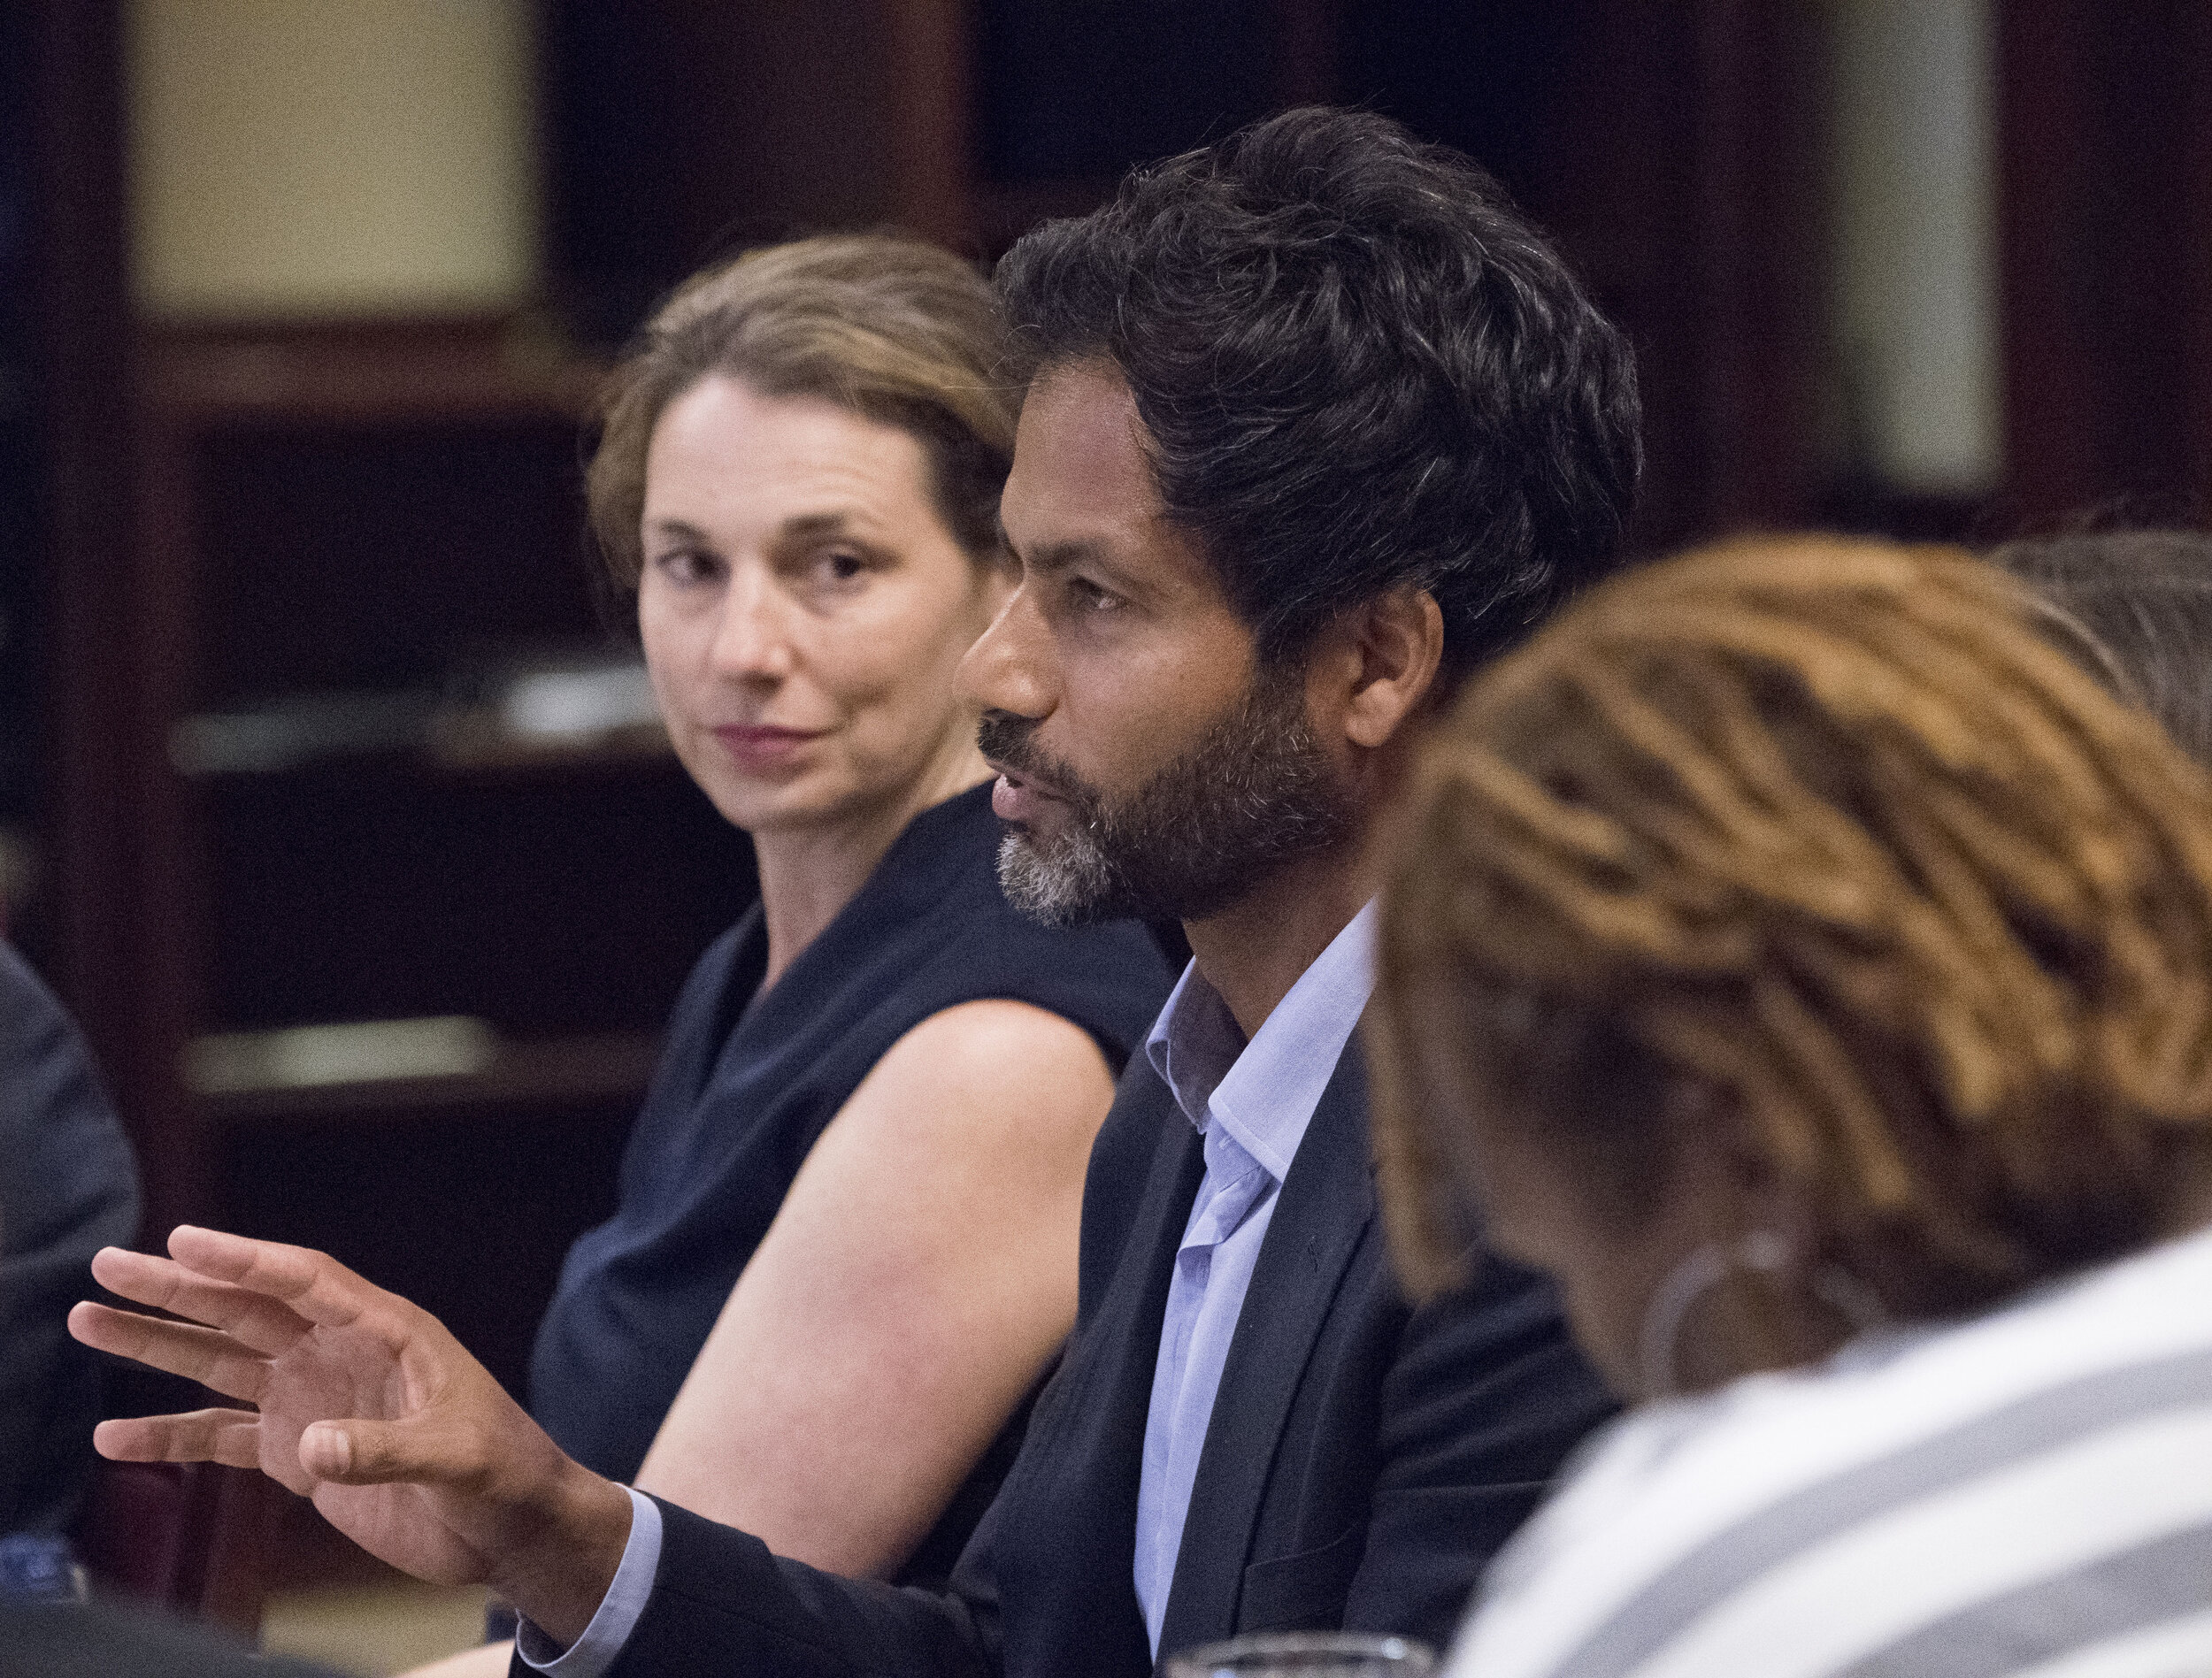  Jameel Jaffer of the Knight First Amendment Institute at Columbia University and Janet Haven from Data &amp; Society. 